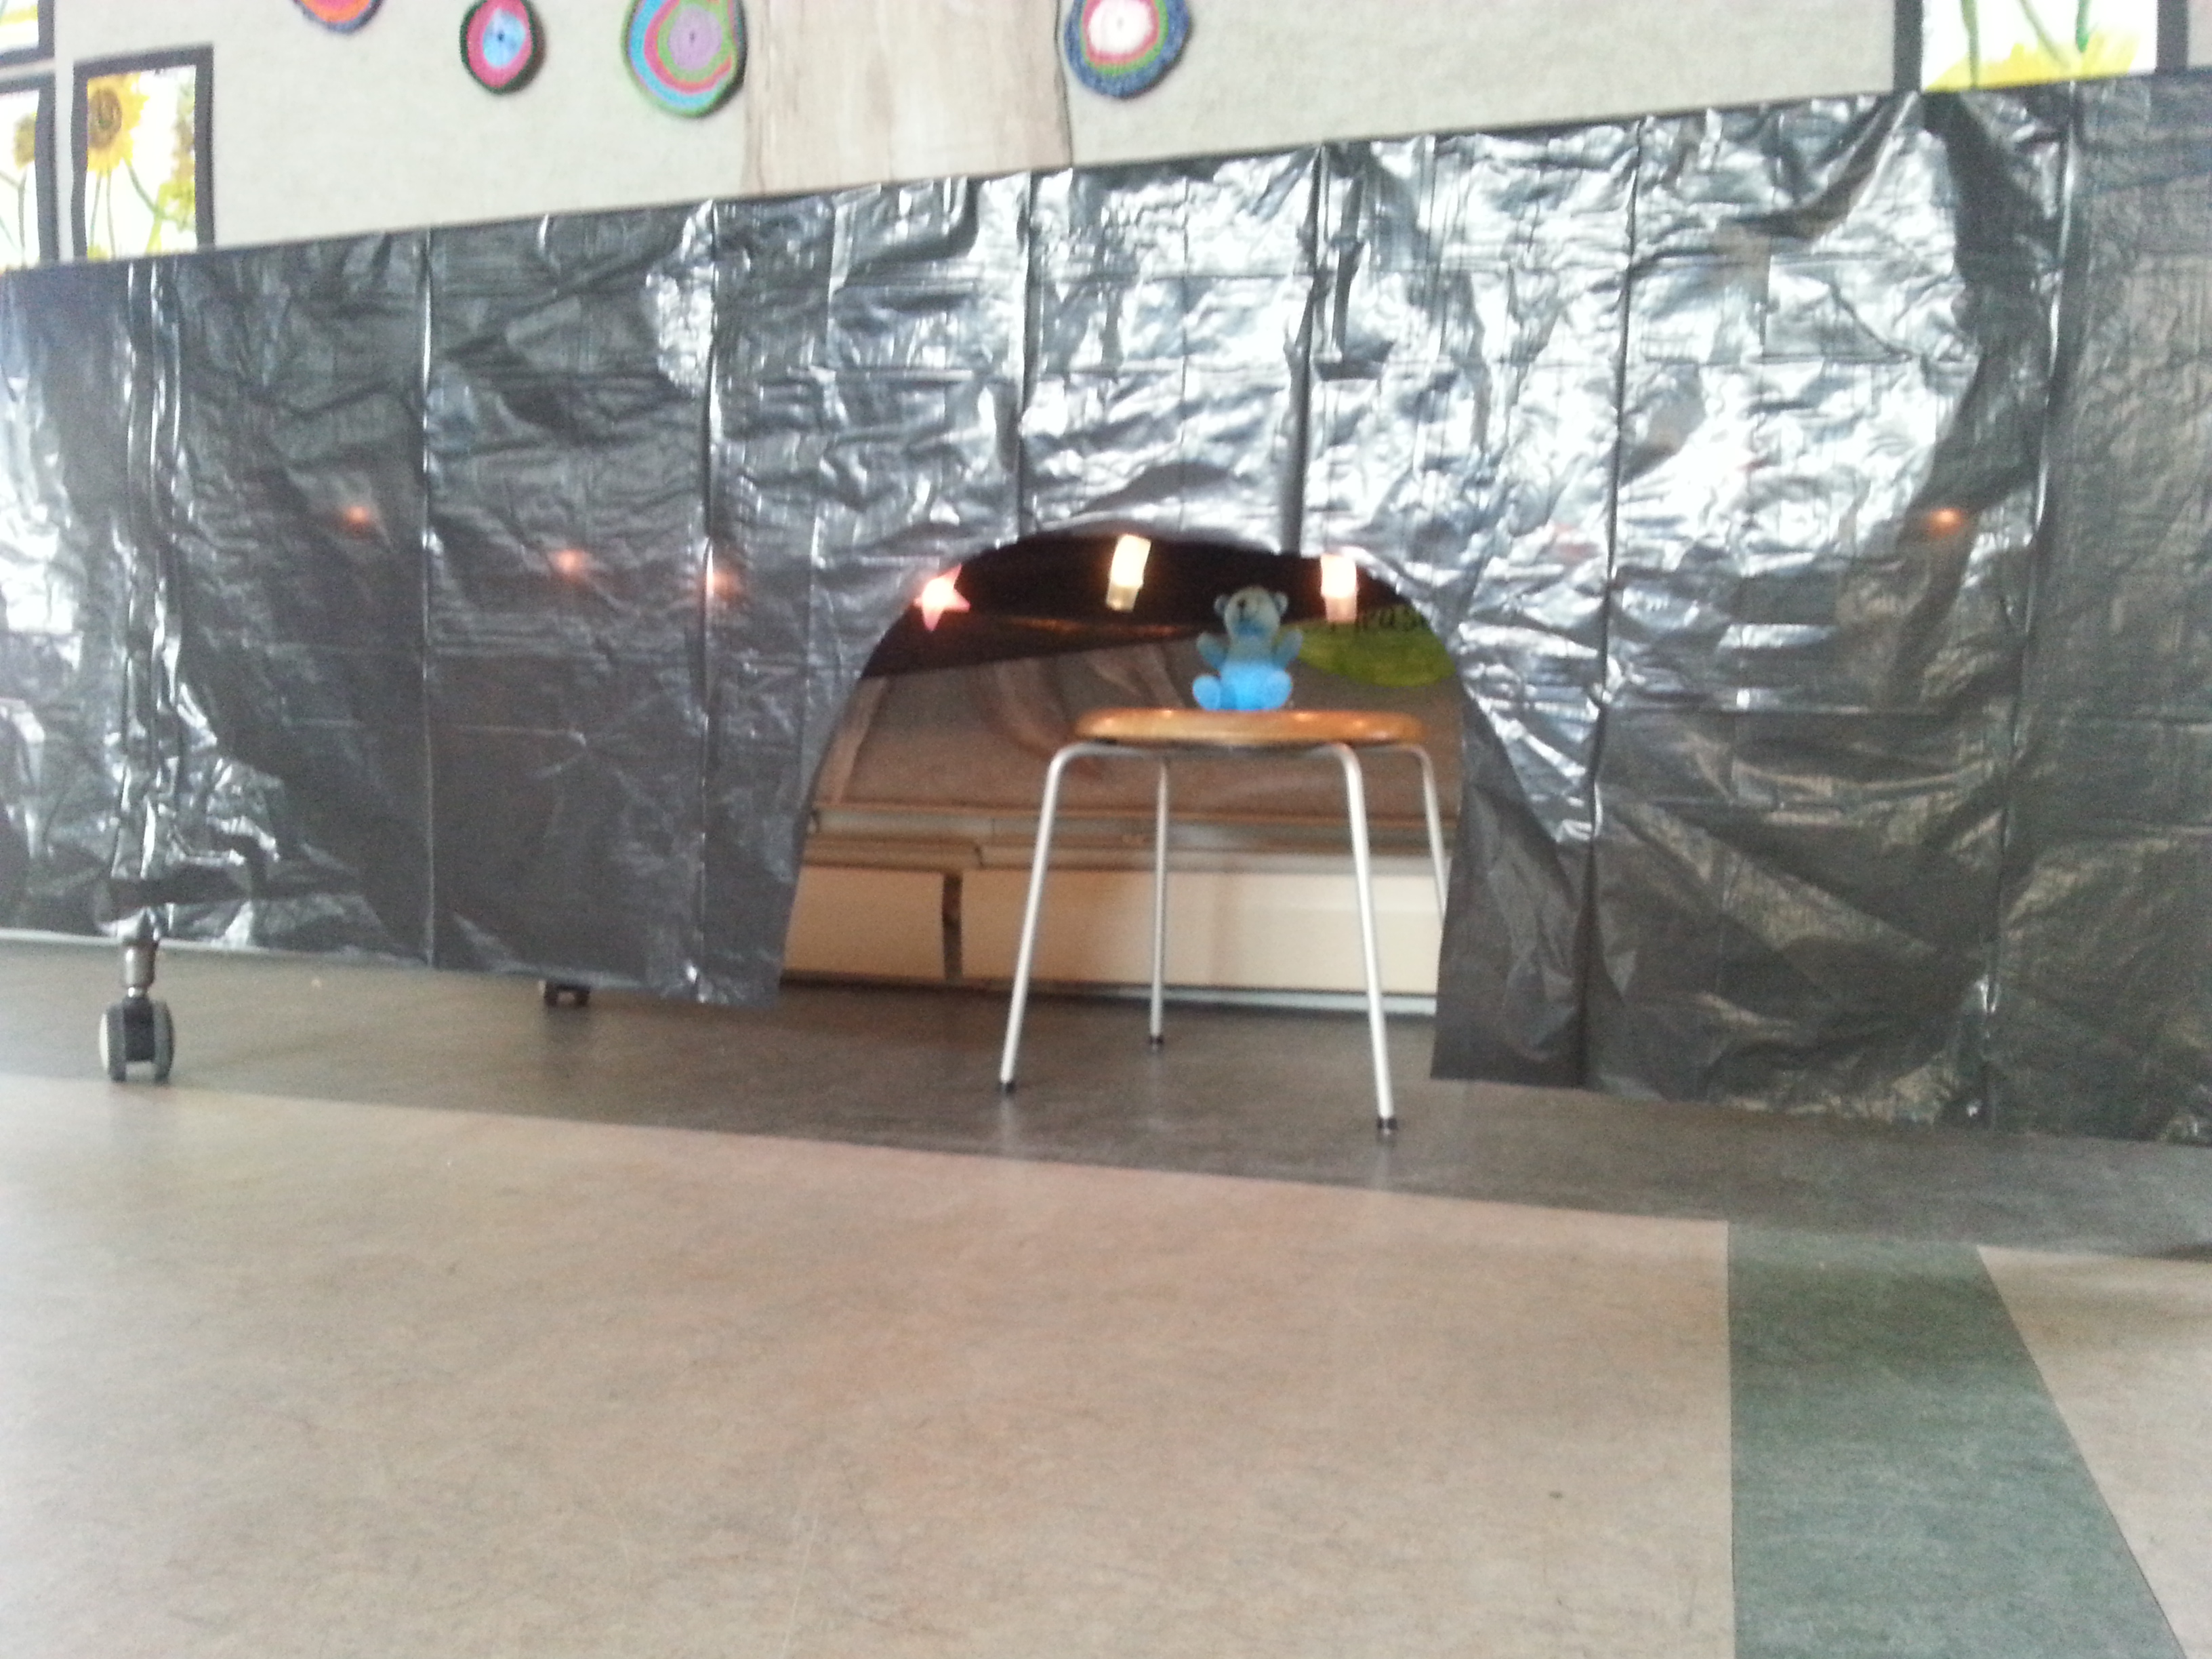 used two garbage bags and covered a table. I strung star lights 